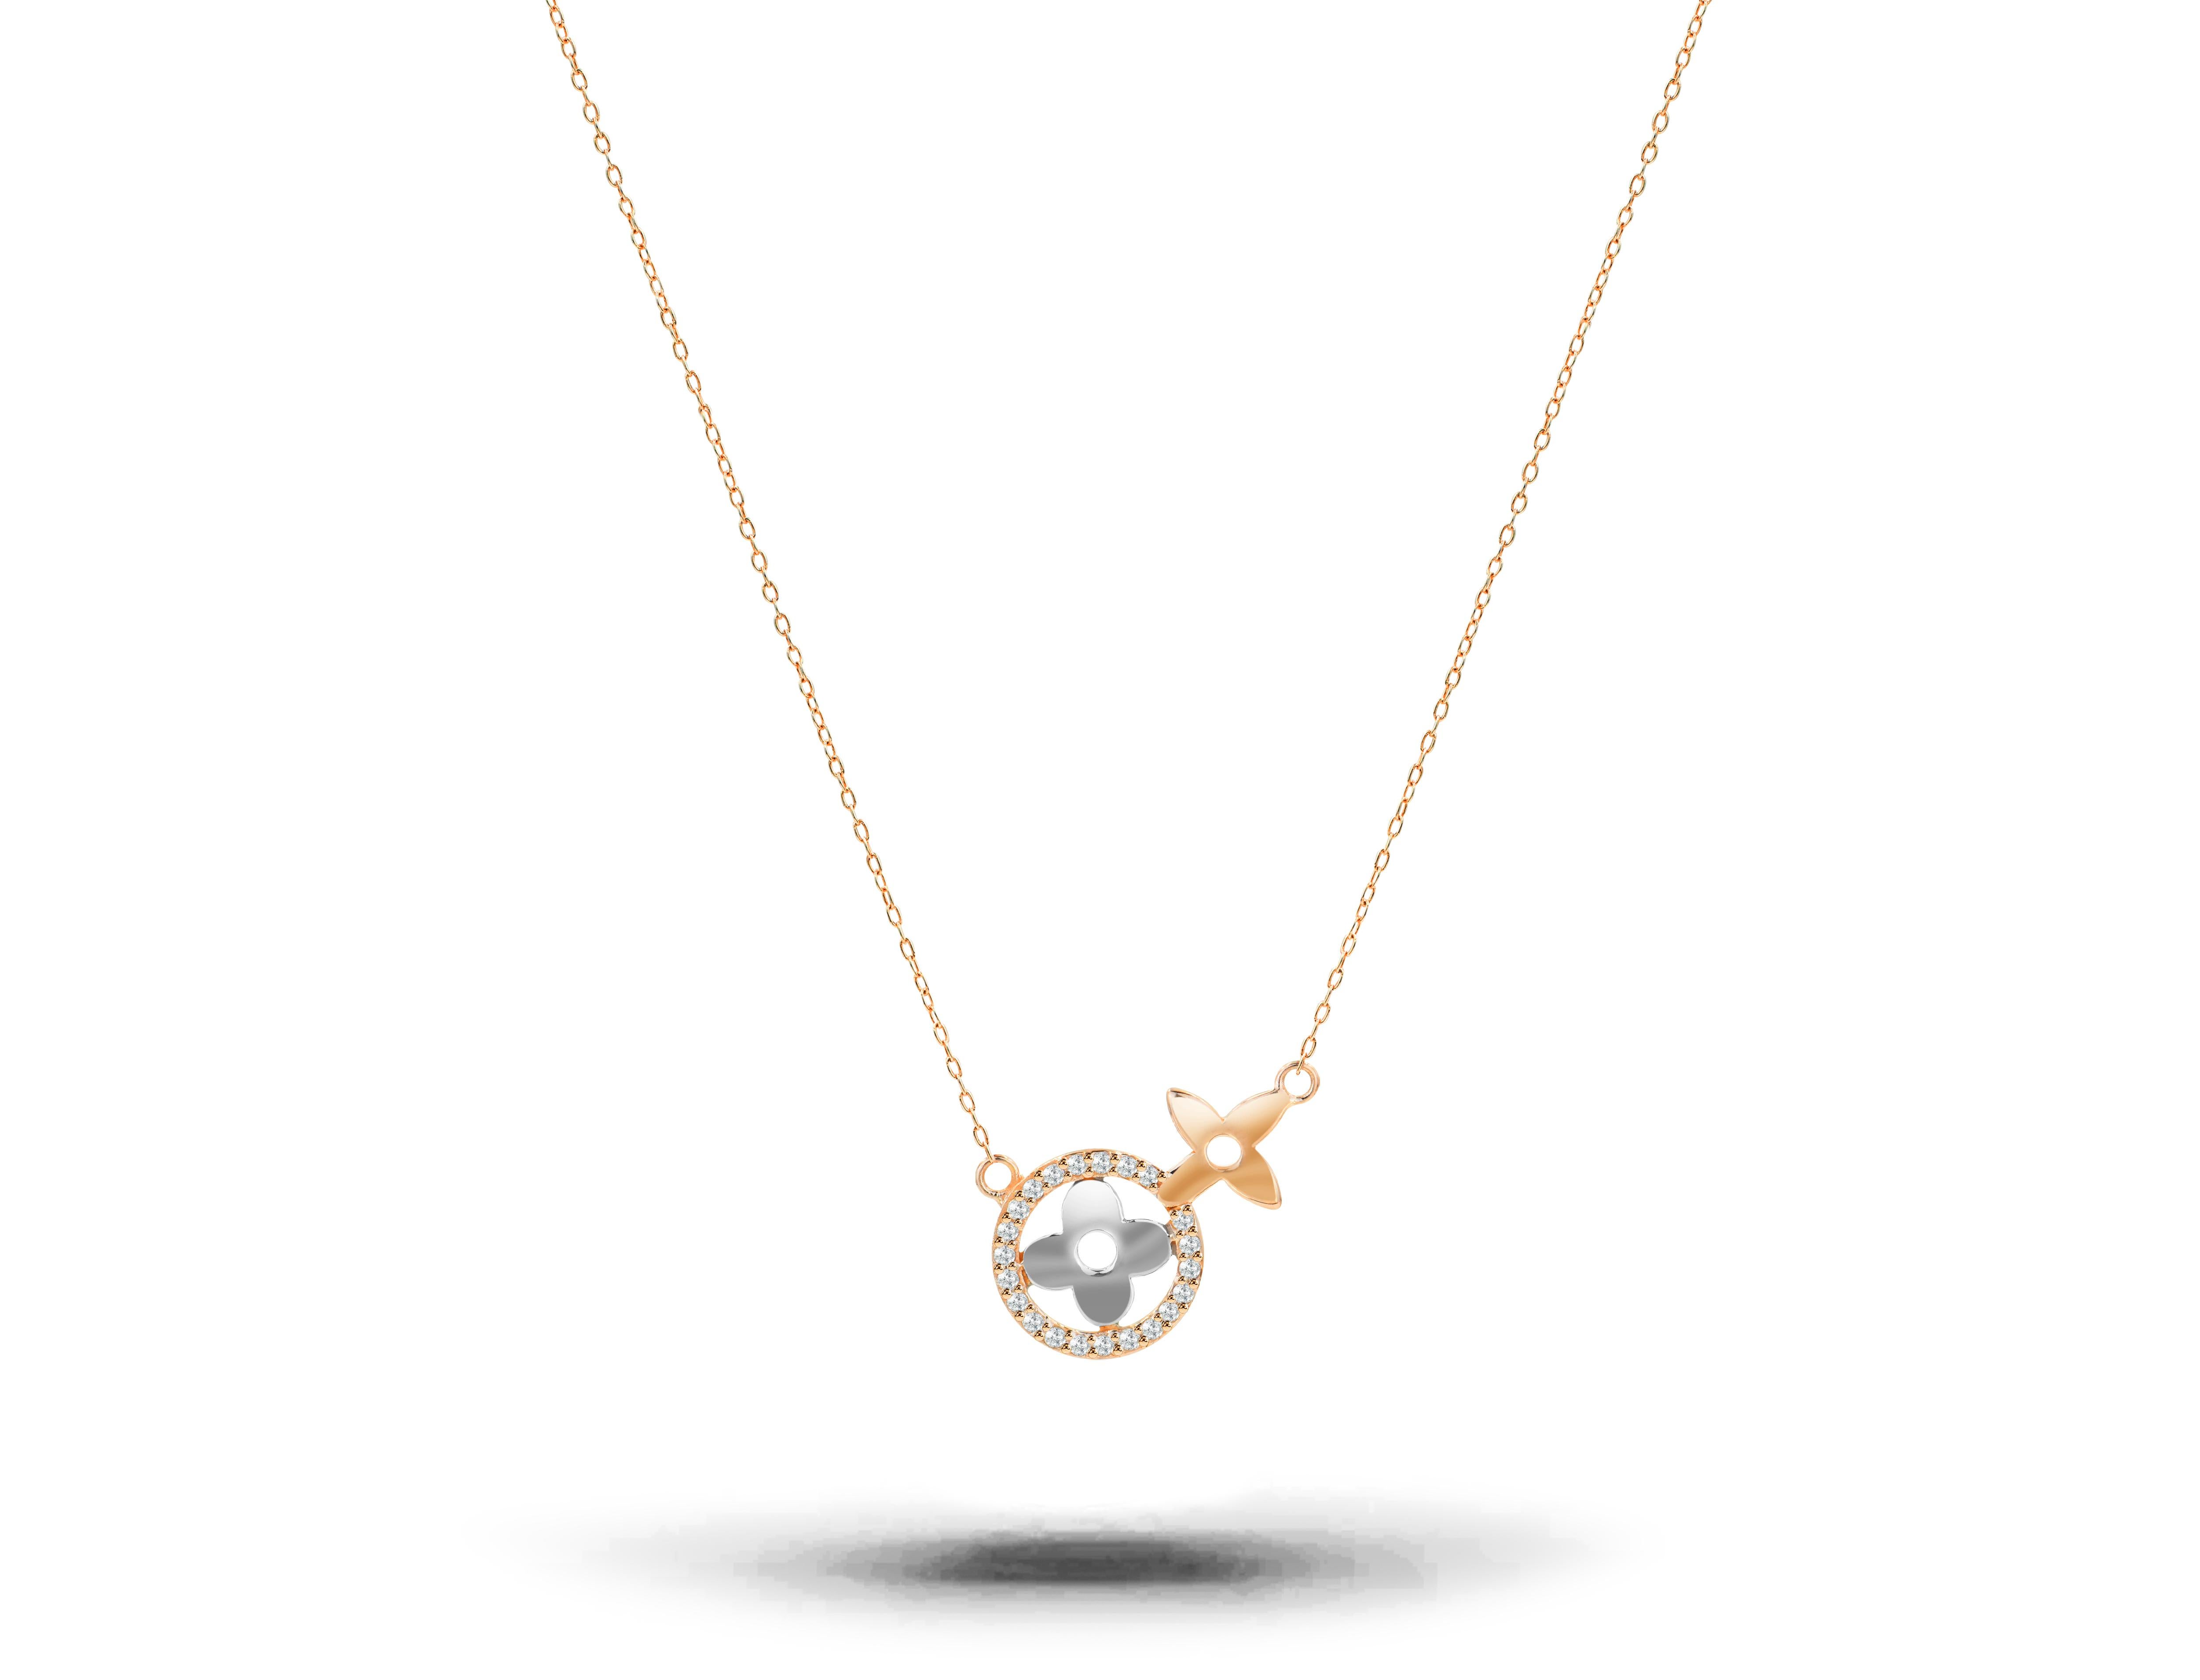 Pave Diamond Clover Necklace is made of 14k solid gold.
Available in three colors of gold: Rose Gold / Yellow Gold / White Gold.

Delicate dainty lucky clover necklace with natural diamonds. This modern minimalist necklace is a perfect gift for your